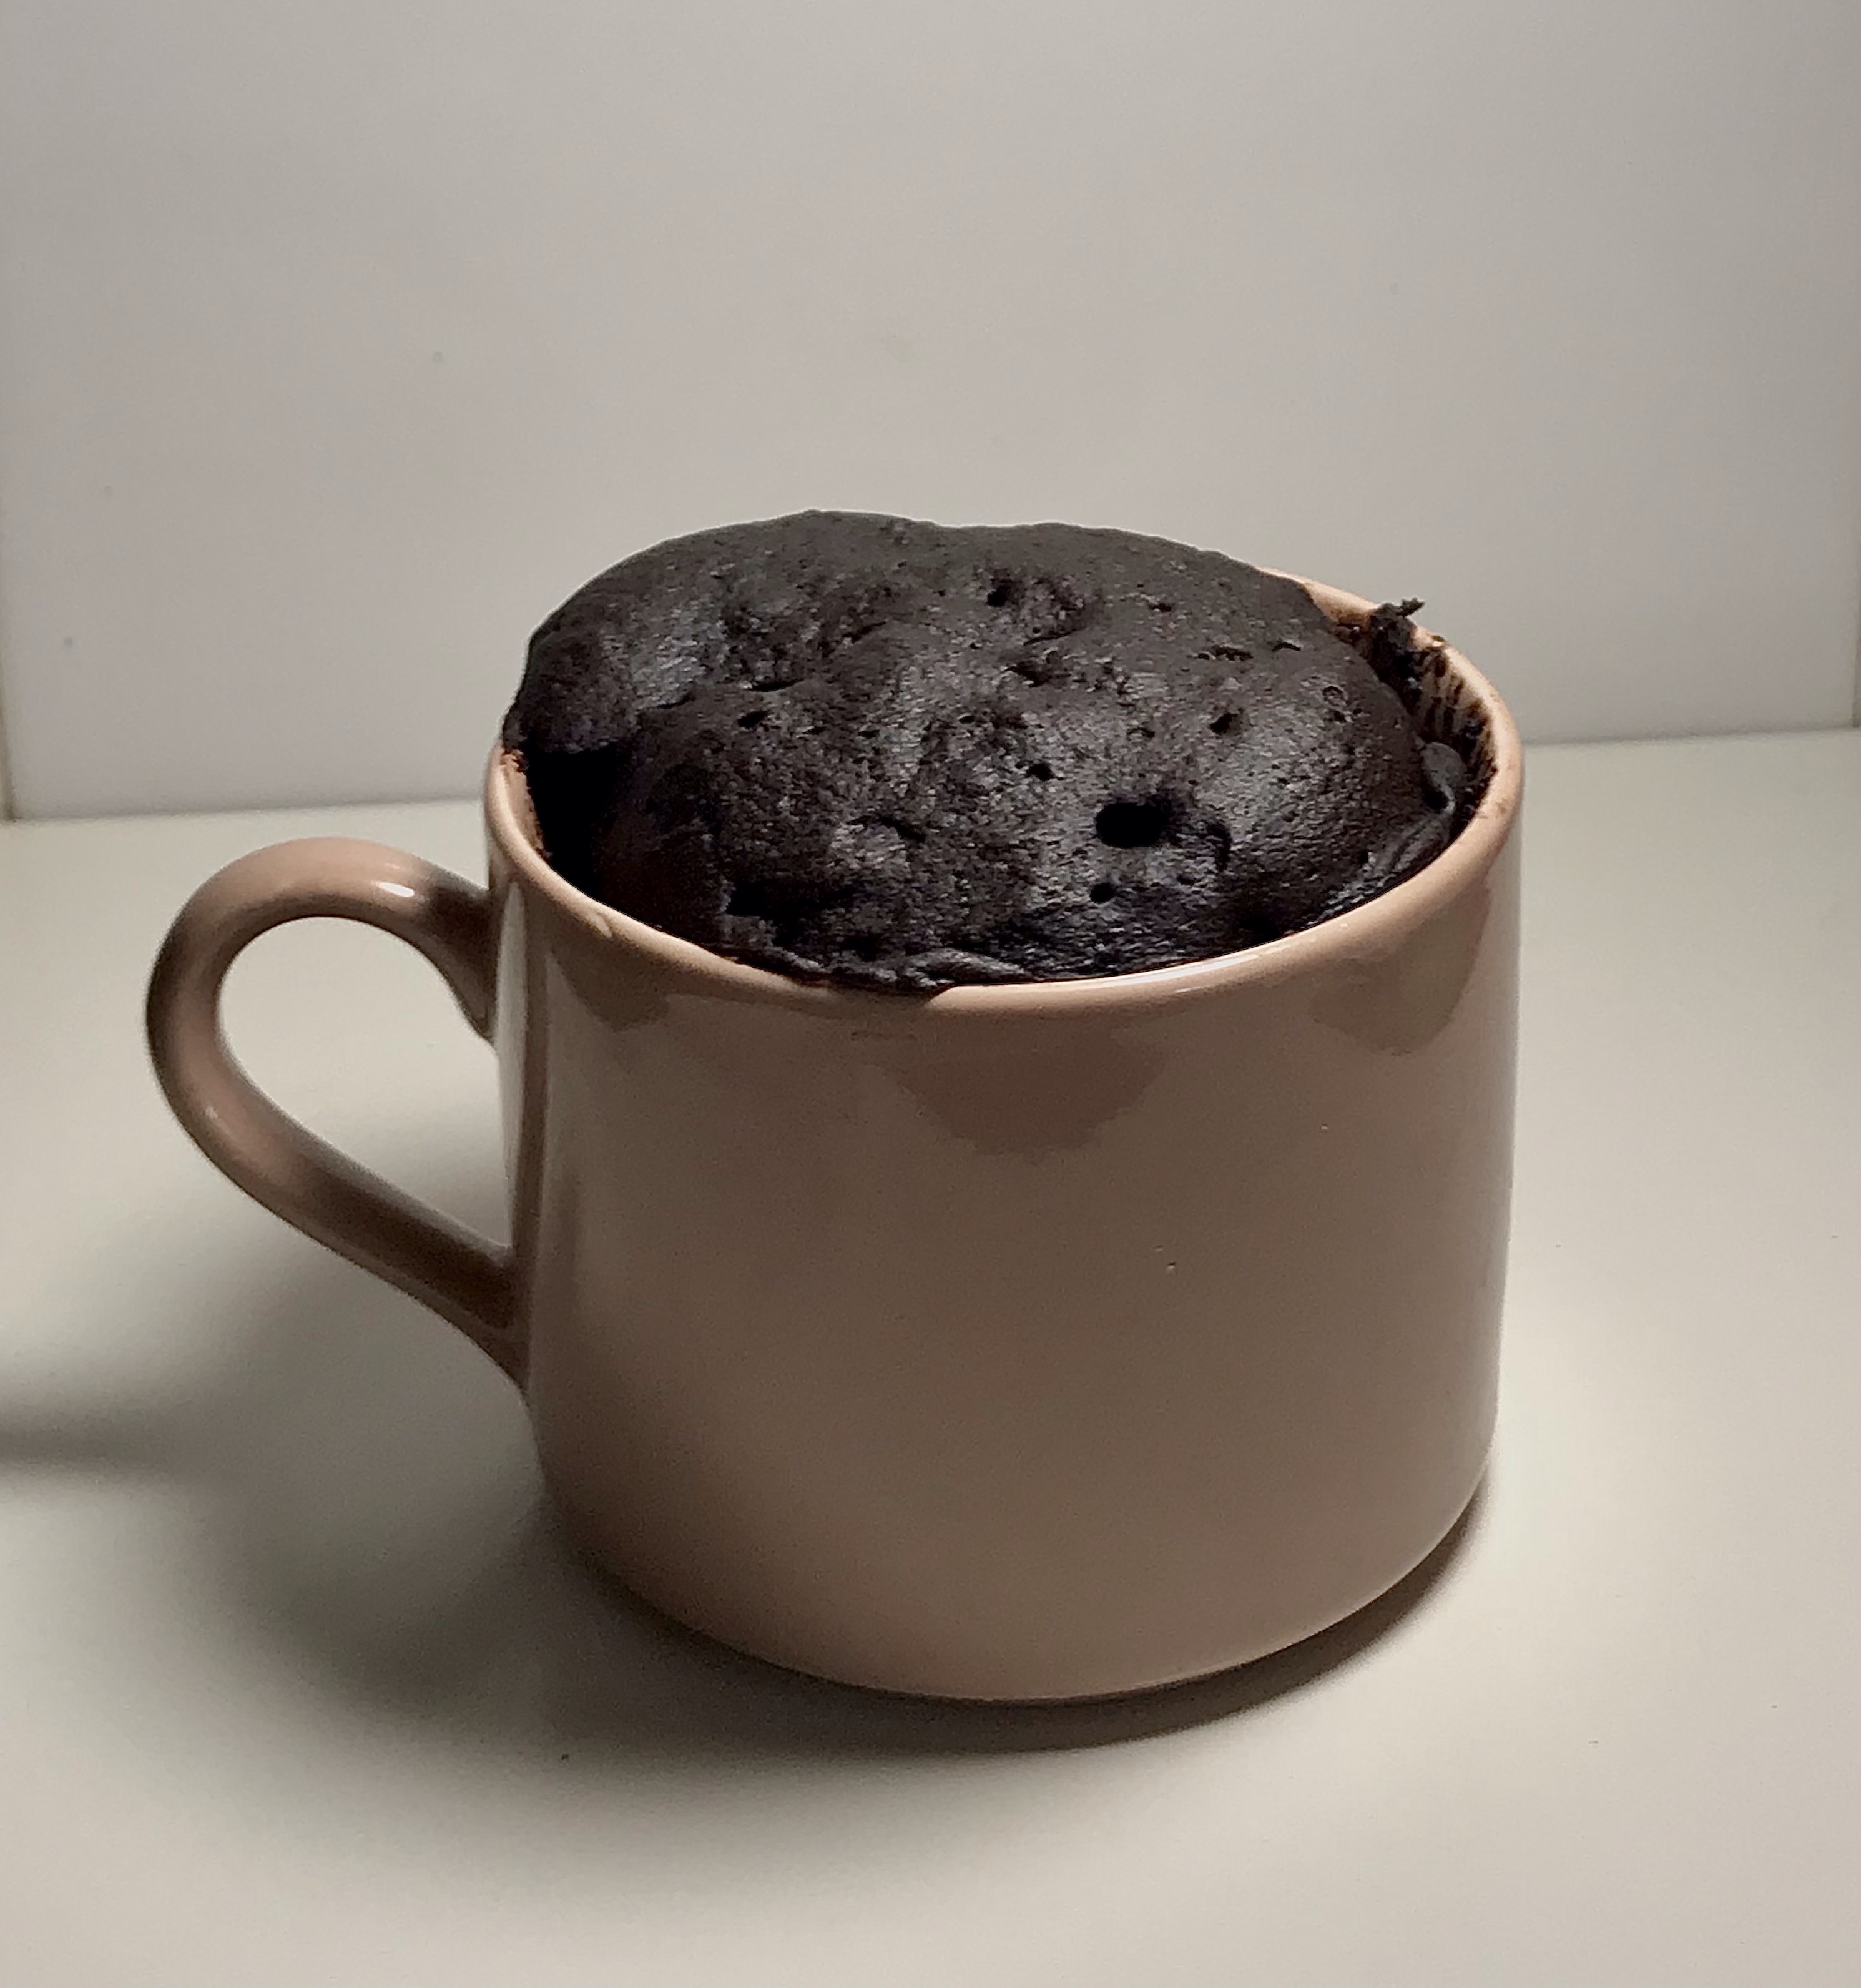 Chocolate cake in a pink ceramic mug on white countertop with white background